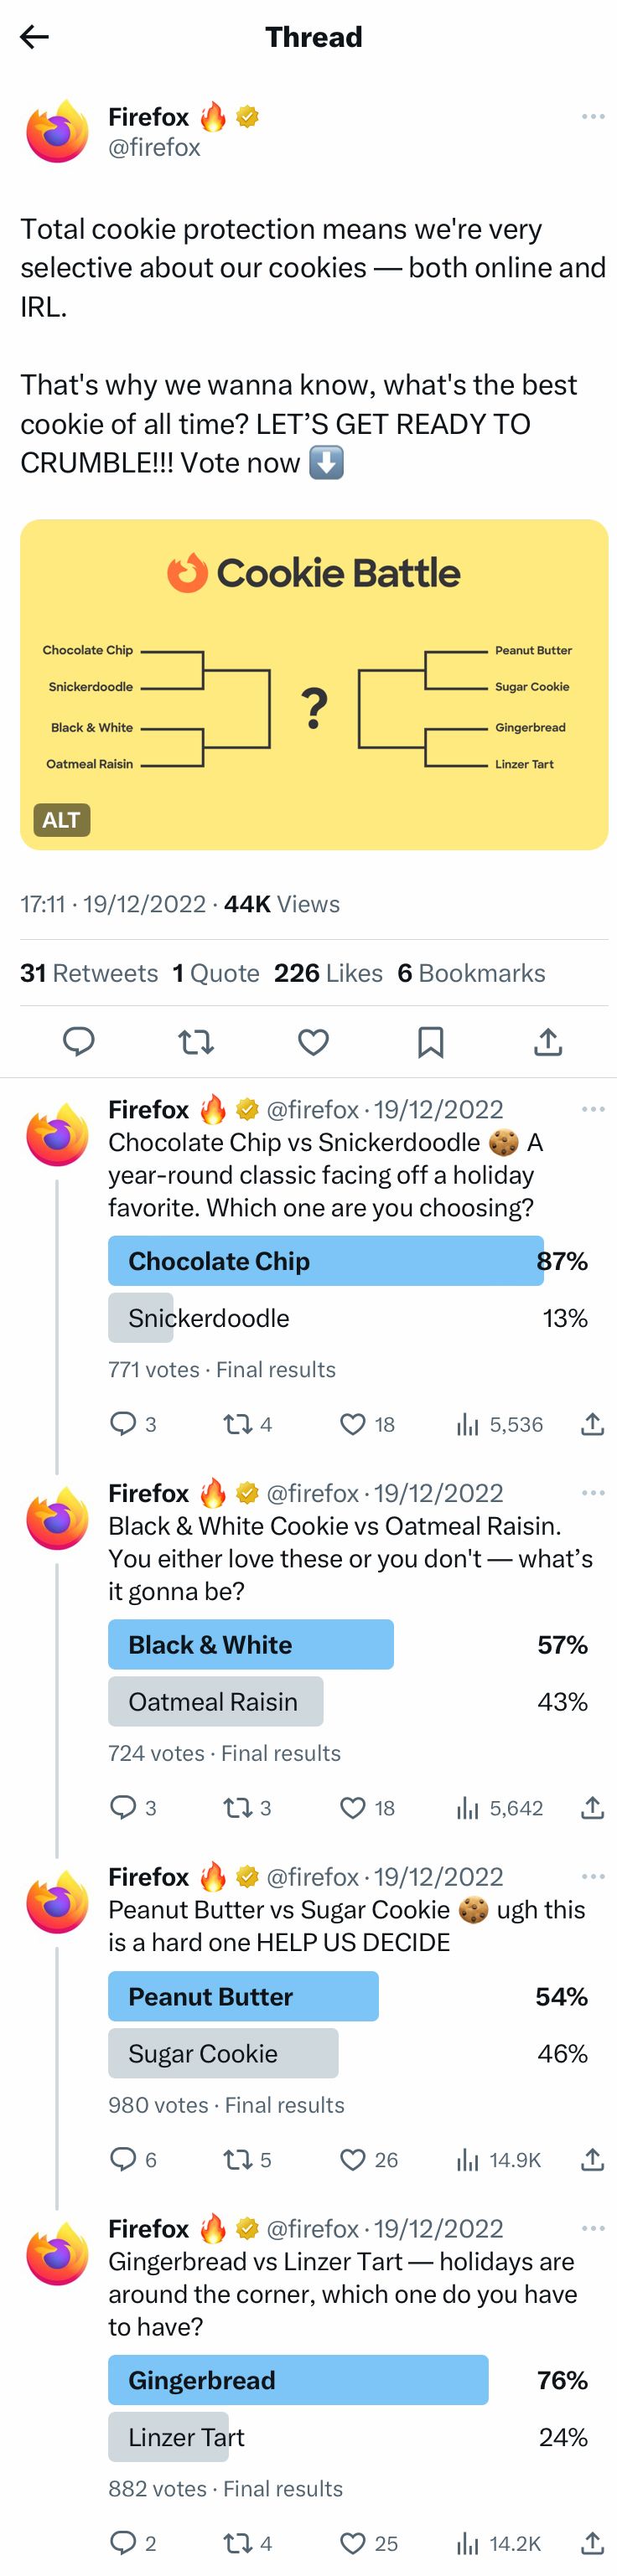 Twitter thread with multiple polls to encourage interaction